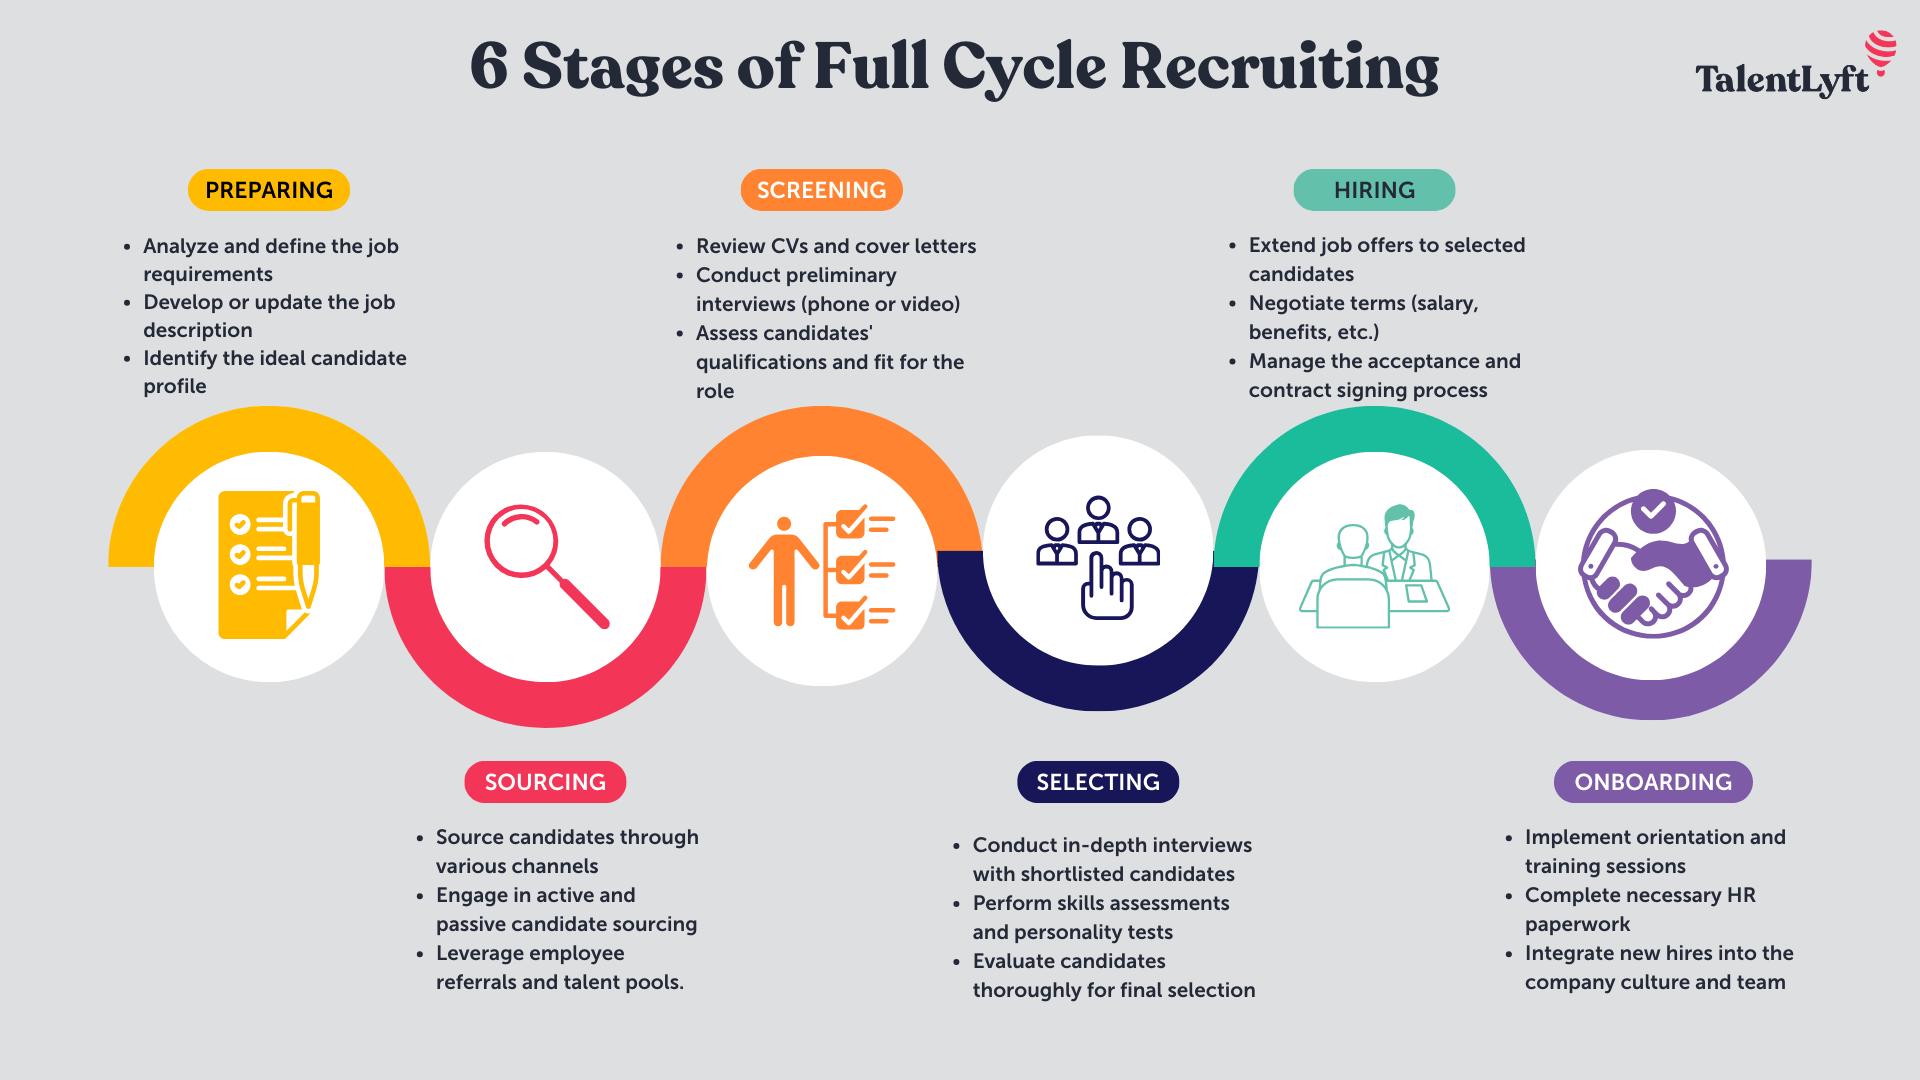 Everything You Need to Know About Full Life Cycle Recruiting